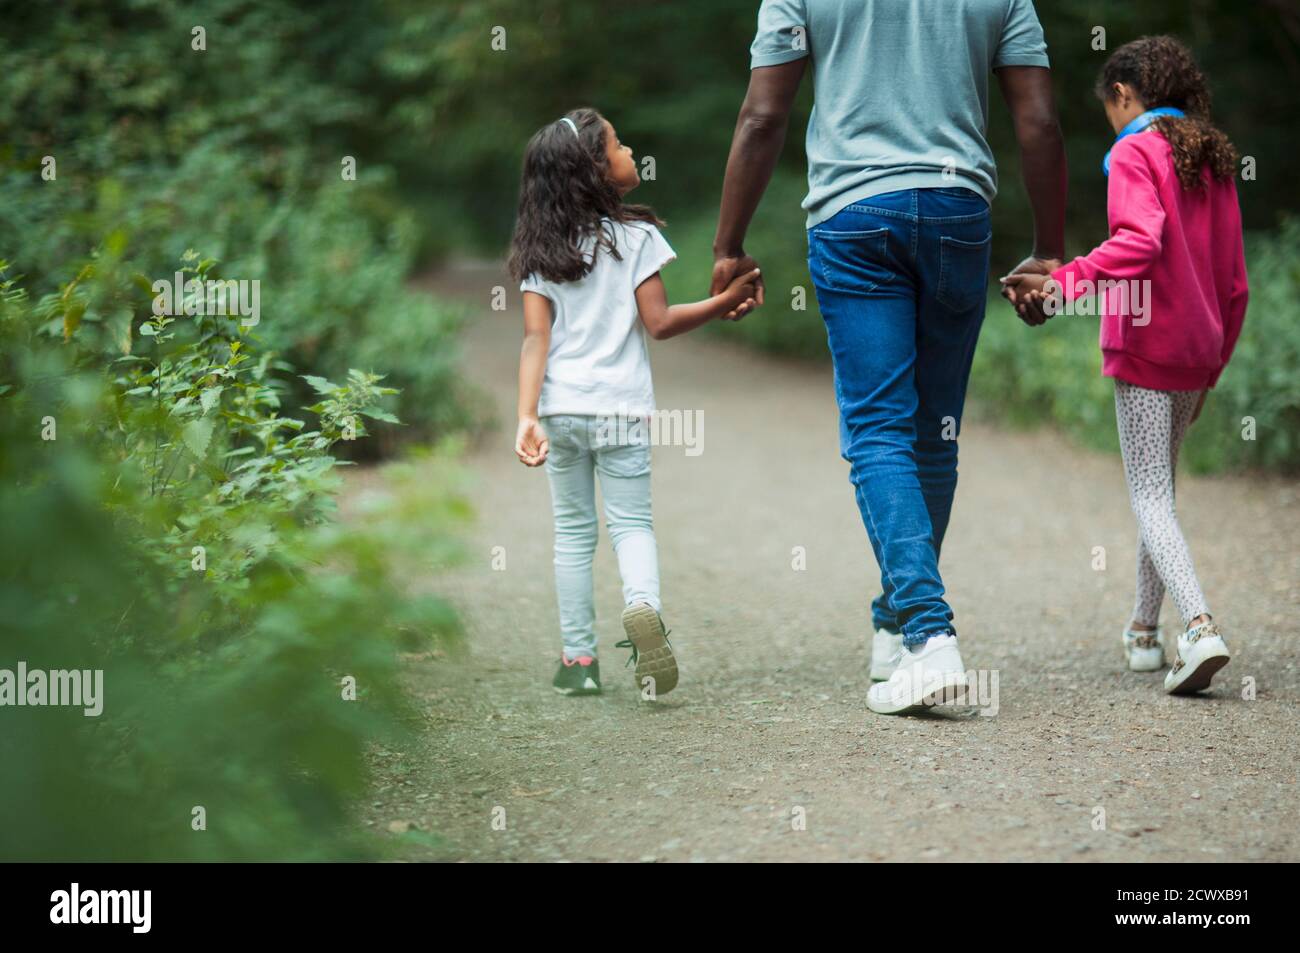 Father and daughters holding hands walking on path in park Stock Photo